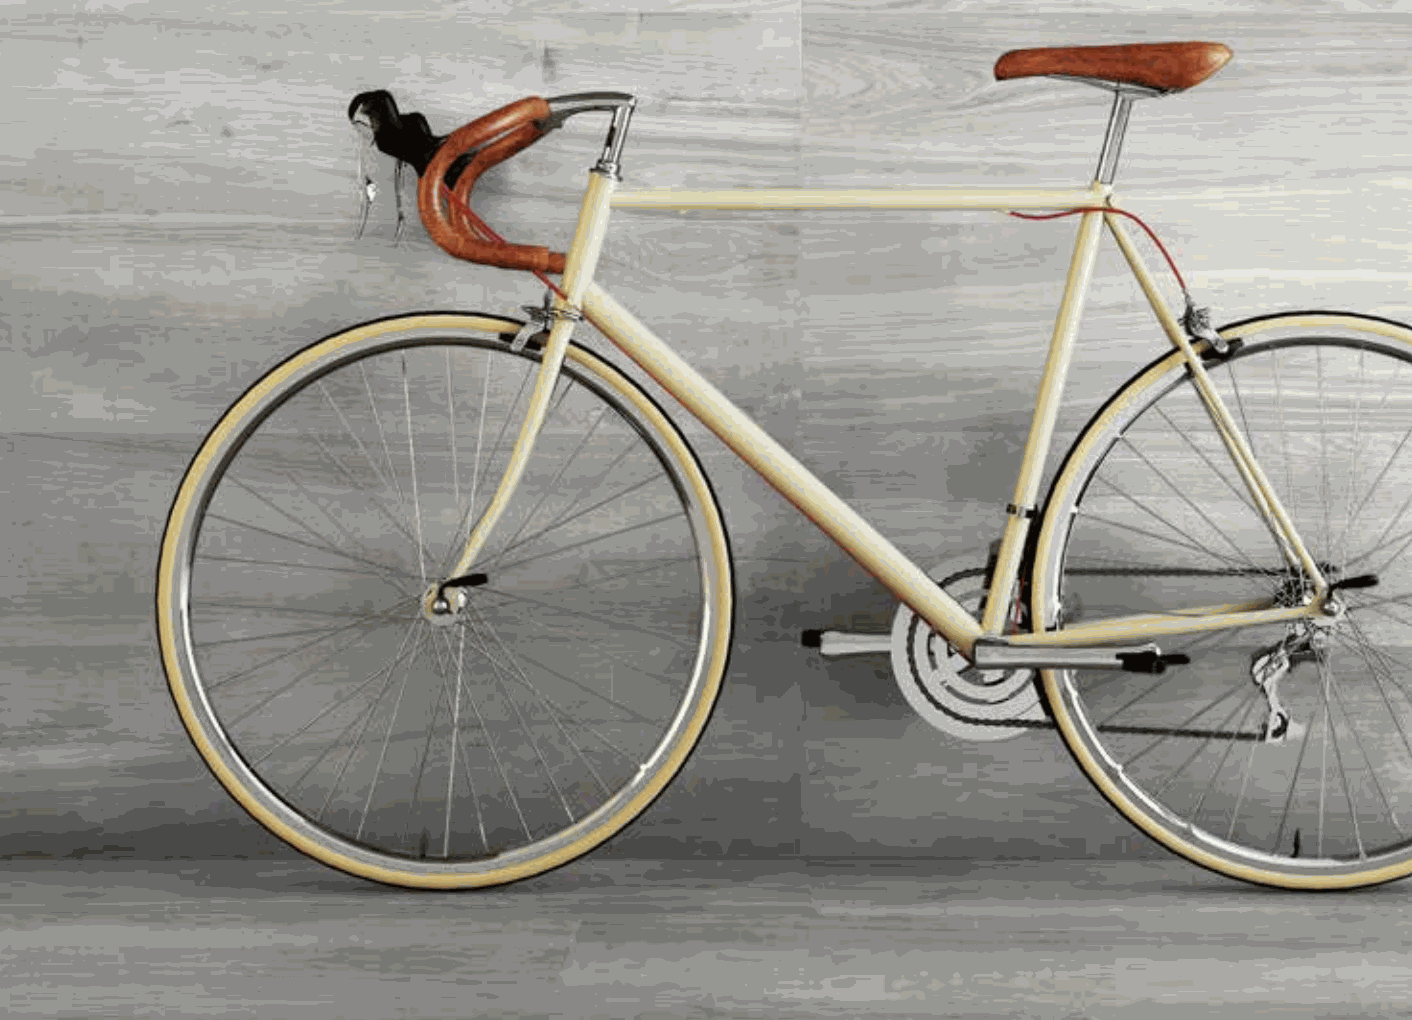 Shows a catalog scene featuring a grey tone wall tile that looks like wooden planks, behind a parked bicycle